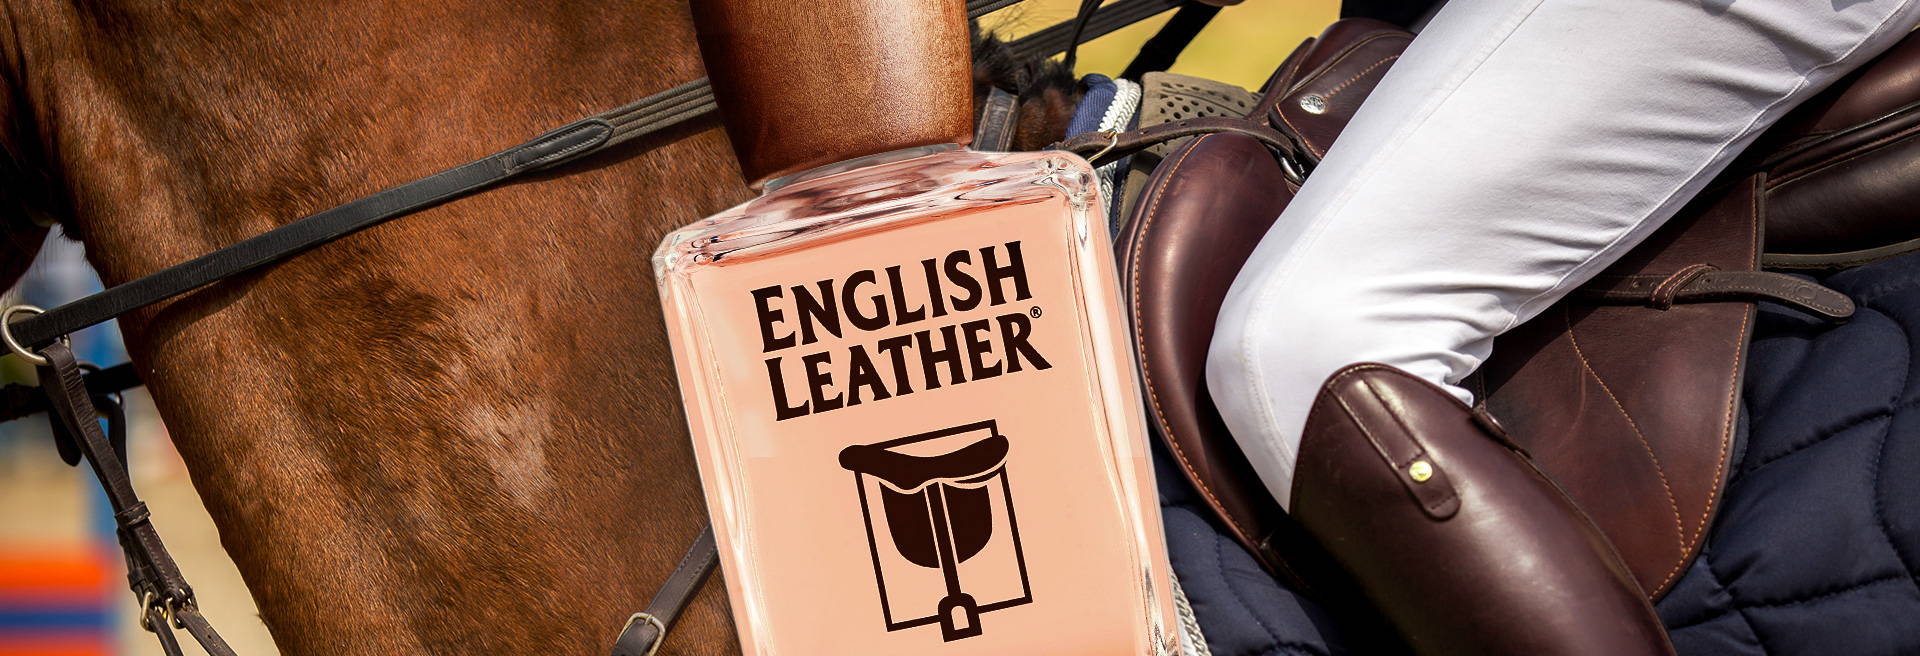 ENGLISH LEATHER by DANA Packaged 1.7 Cologne Splash NEW & SEALED